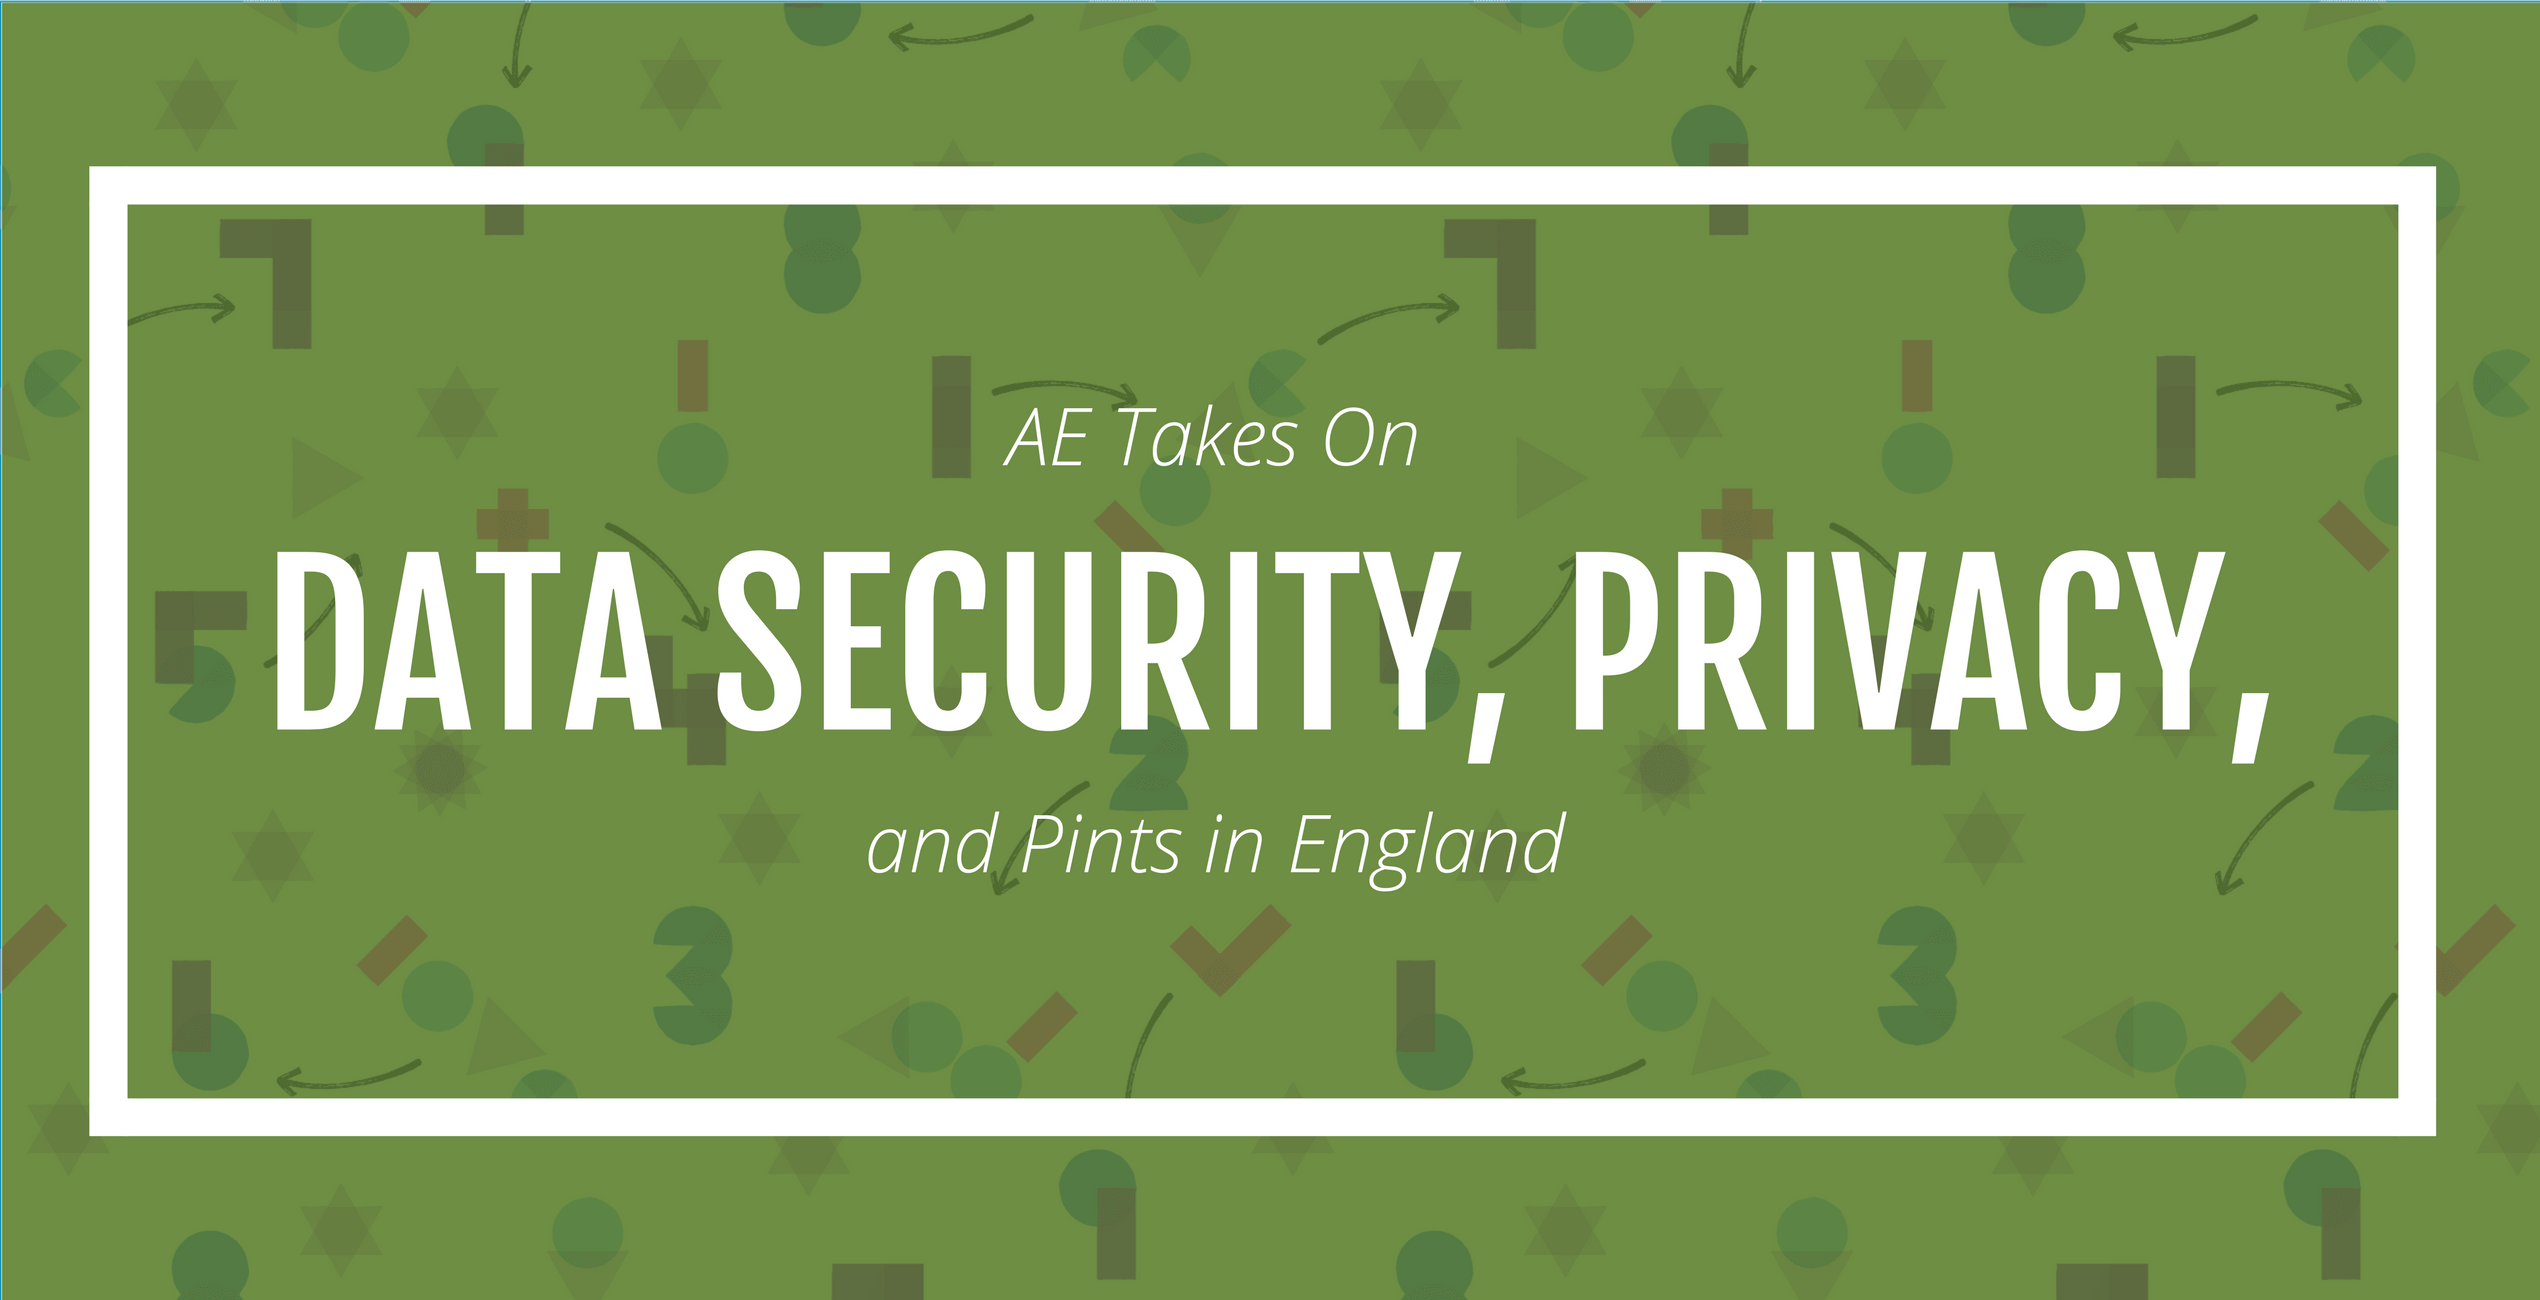 Data Security, Privacy, and Pints in England